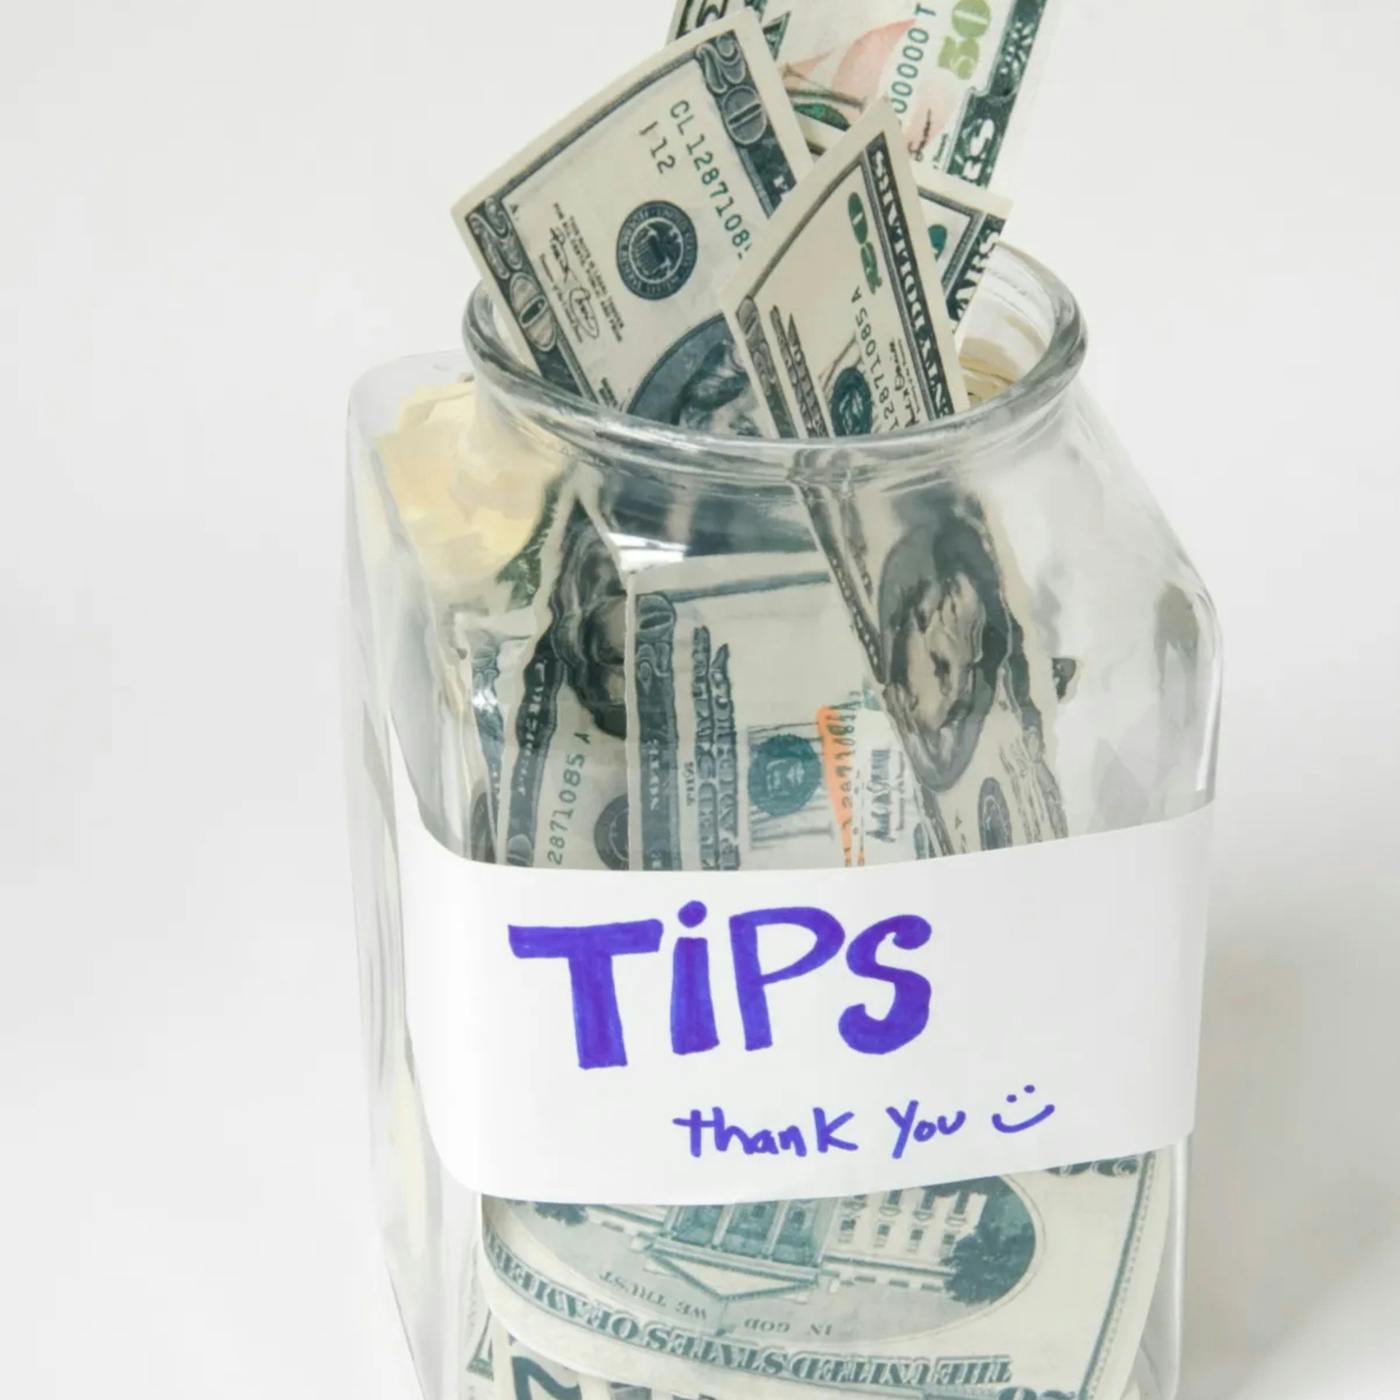 Ep. 256 - Tipping, 5 on It, Goin In